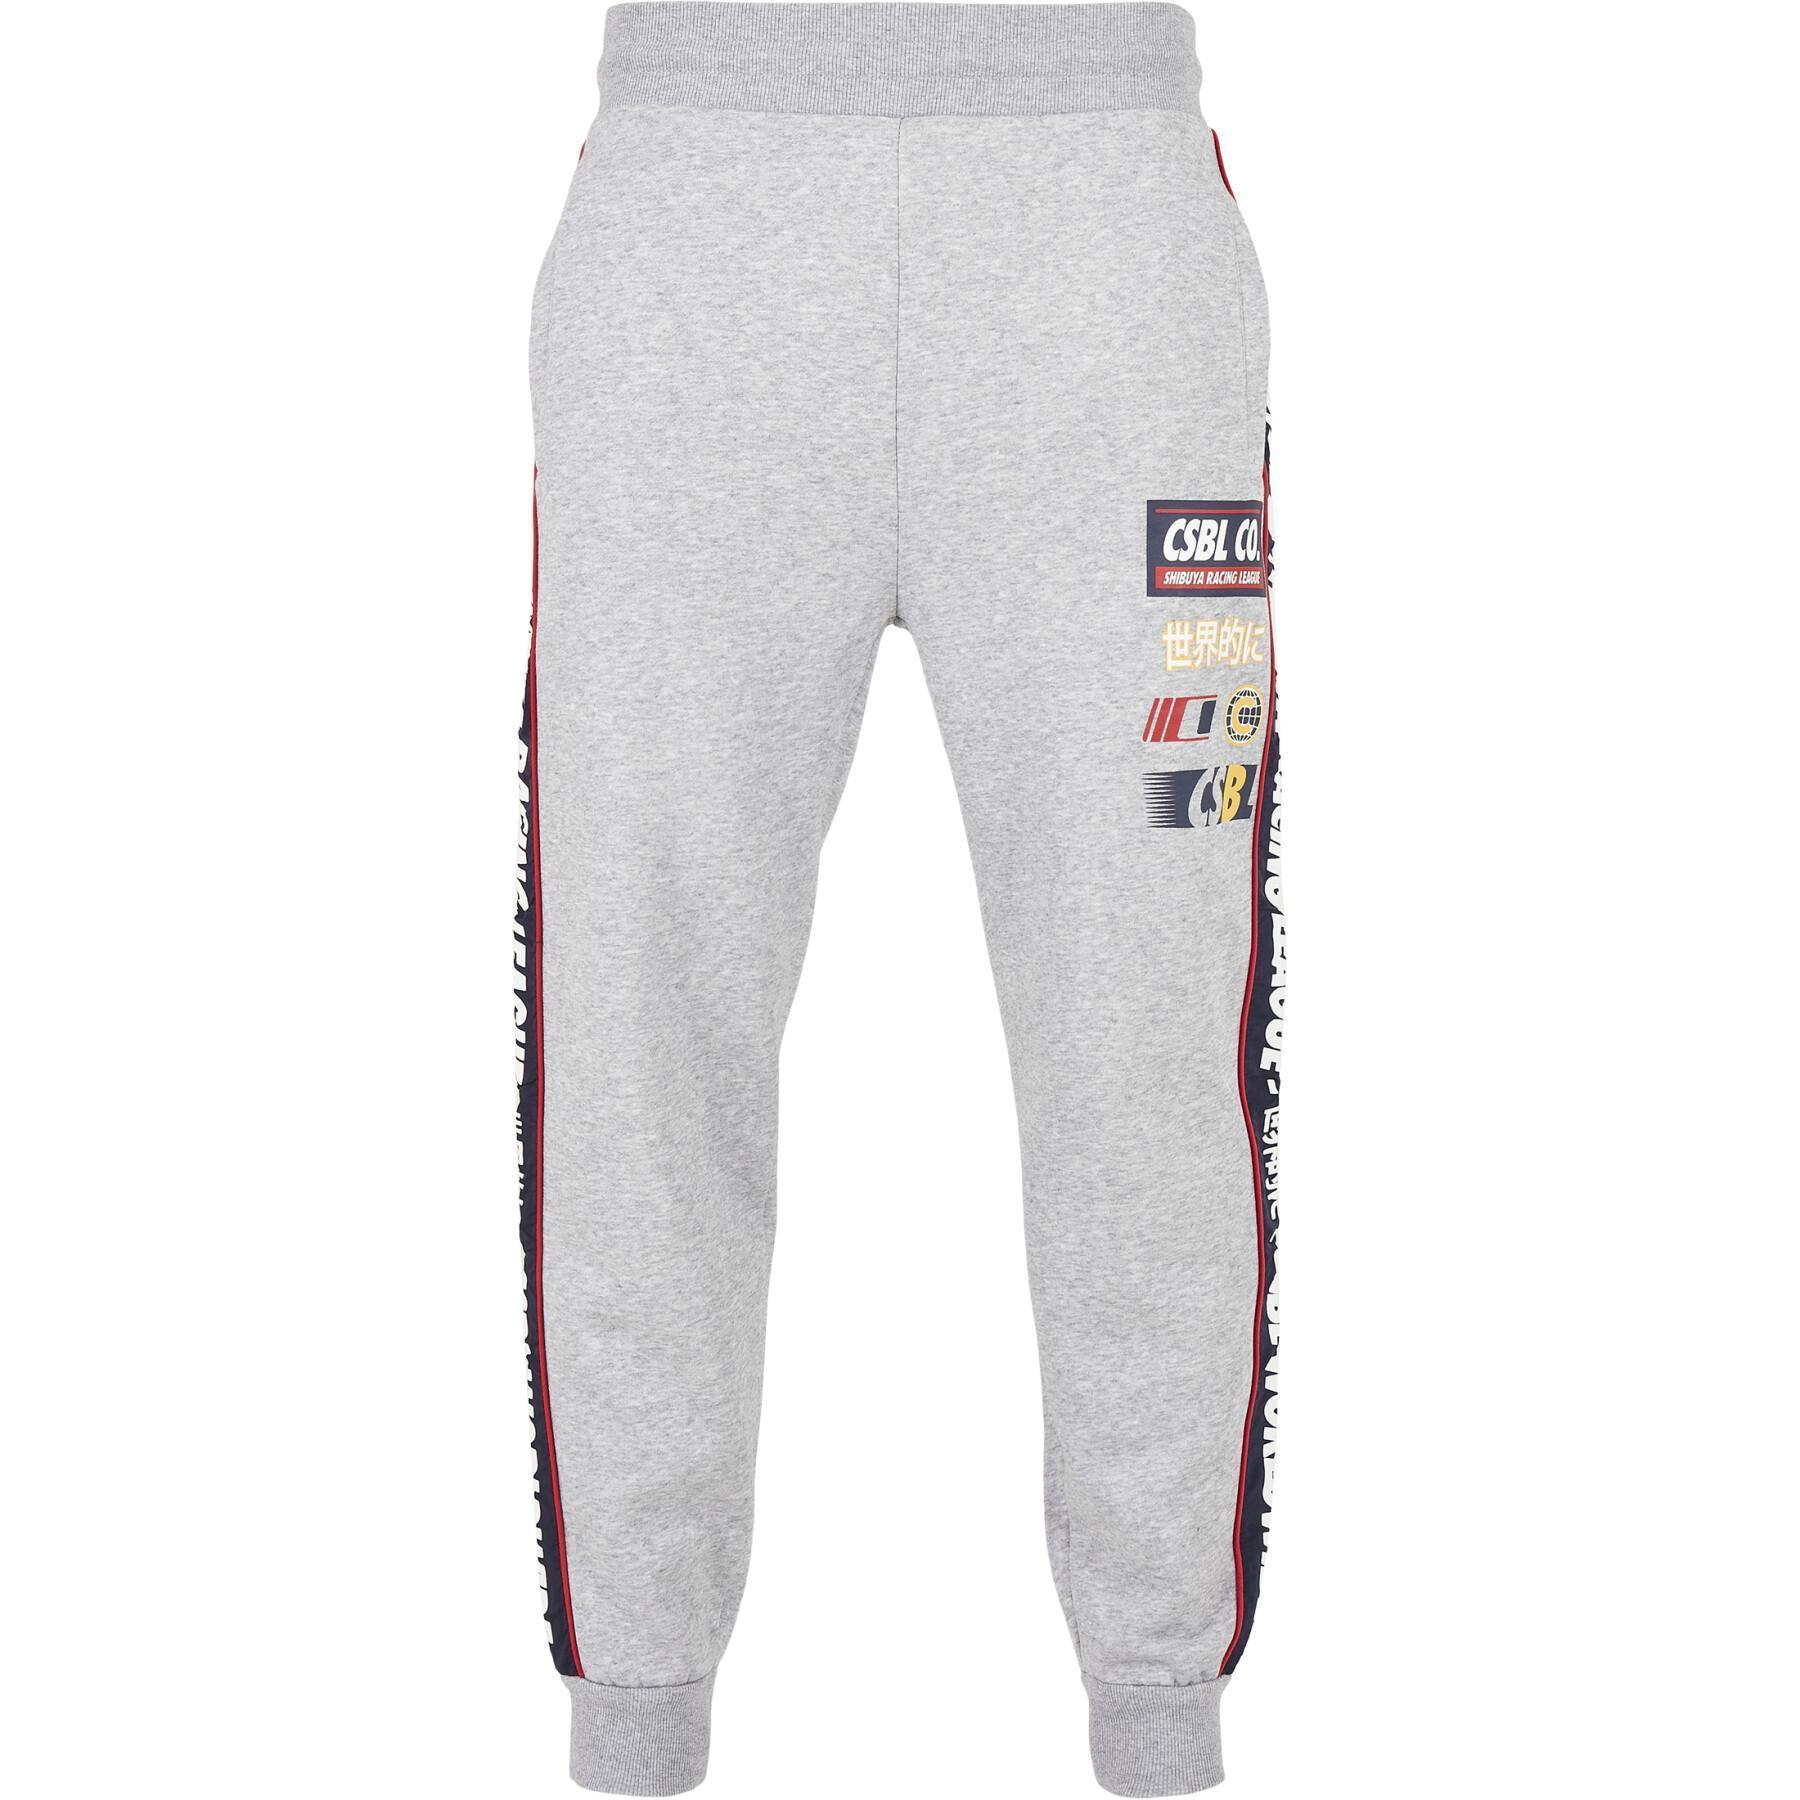 cayler&son ctr trousers